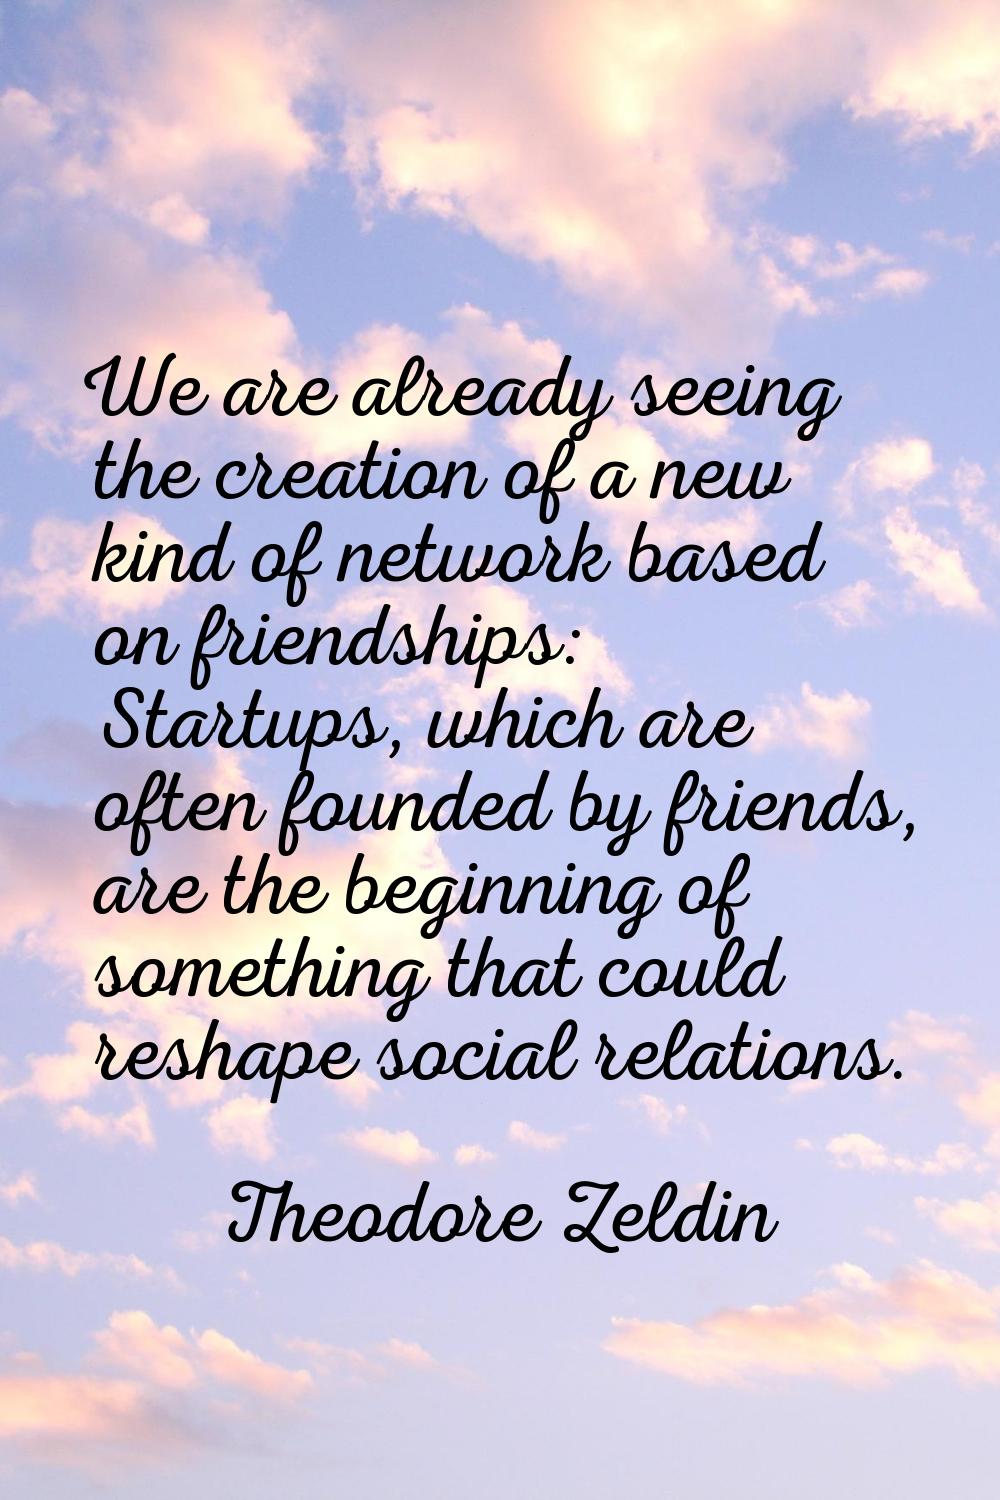 We are already seeing the creation of a new kind of network based on friendships: Startups, which a